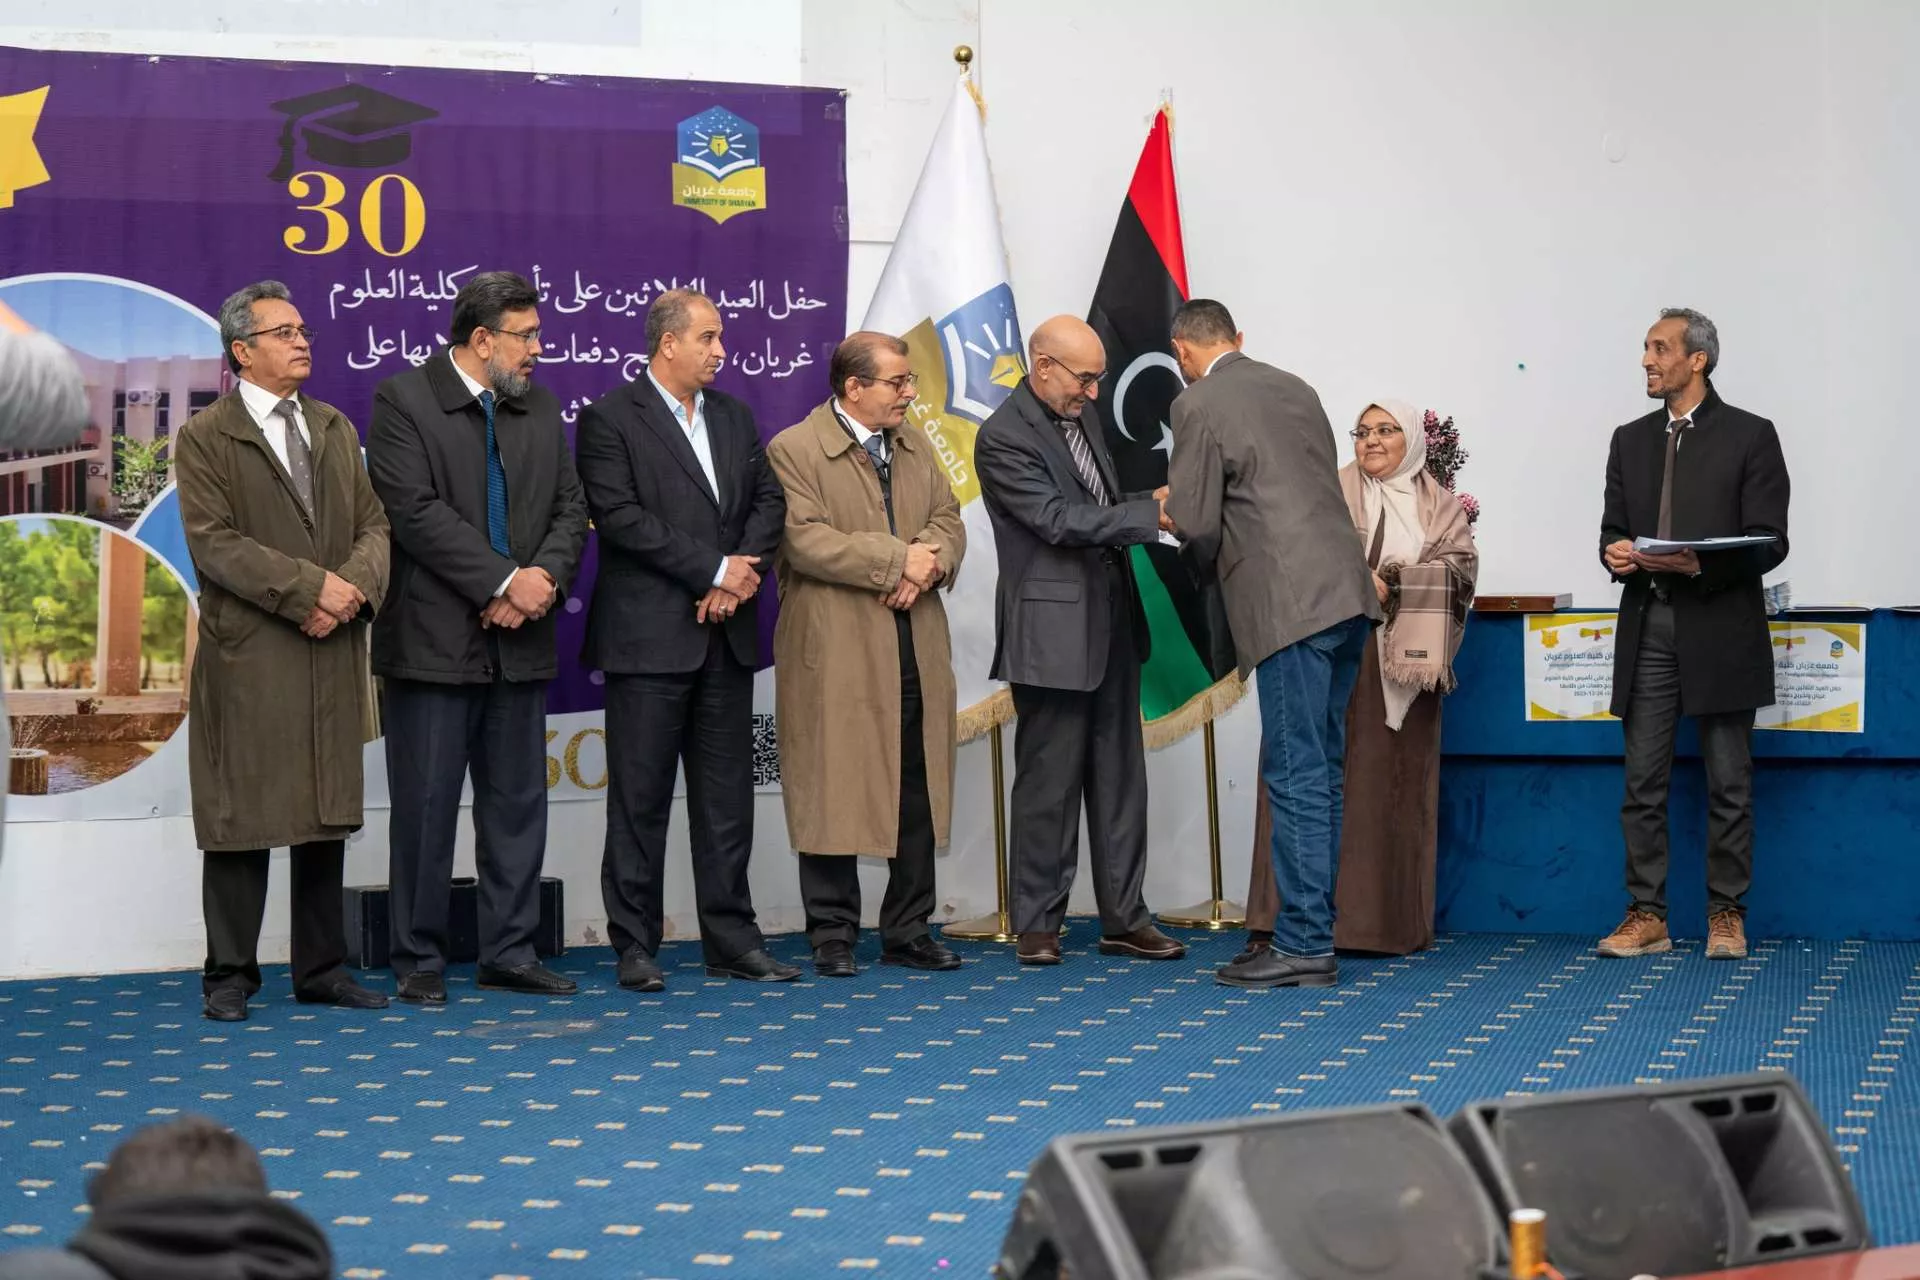 Faculty of Science Gharyan celebrates its thirtieth anniversary